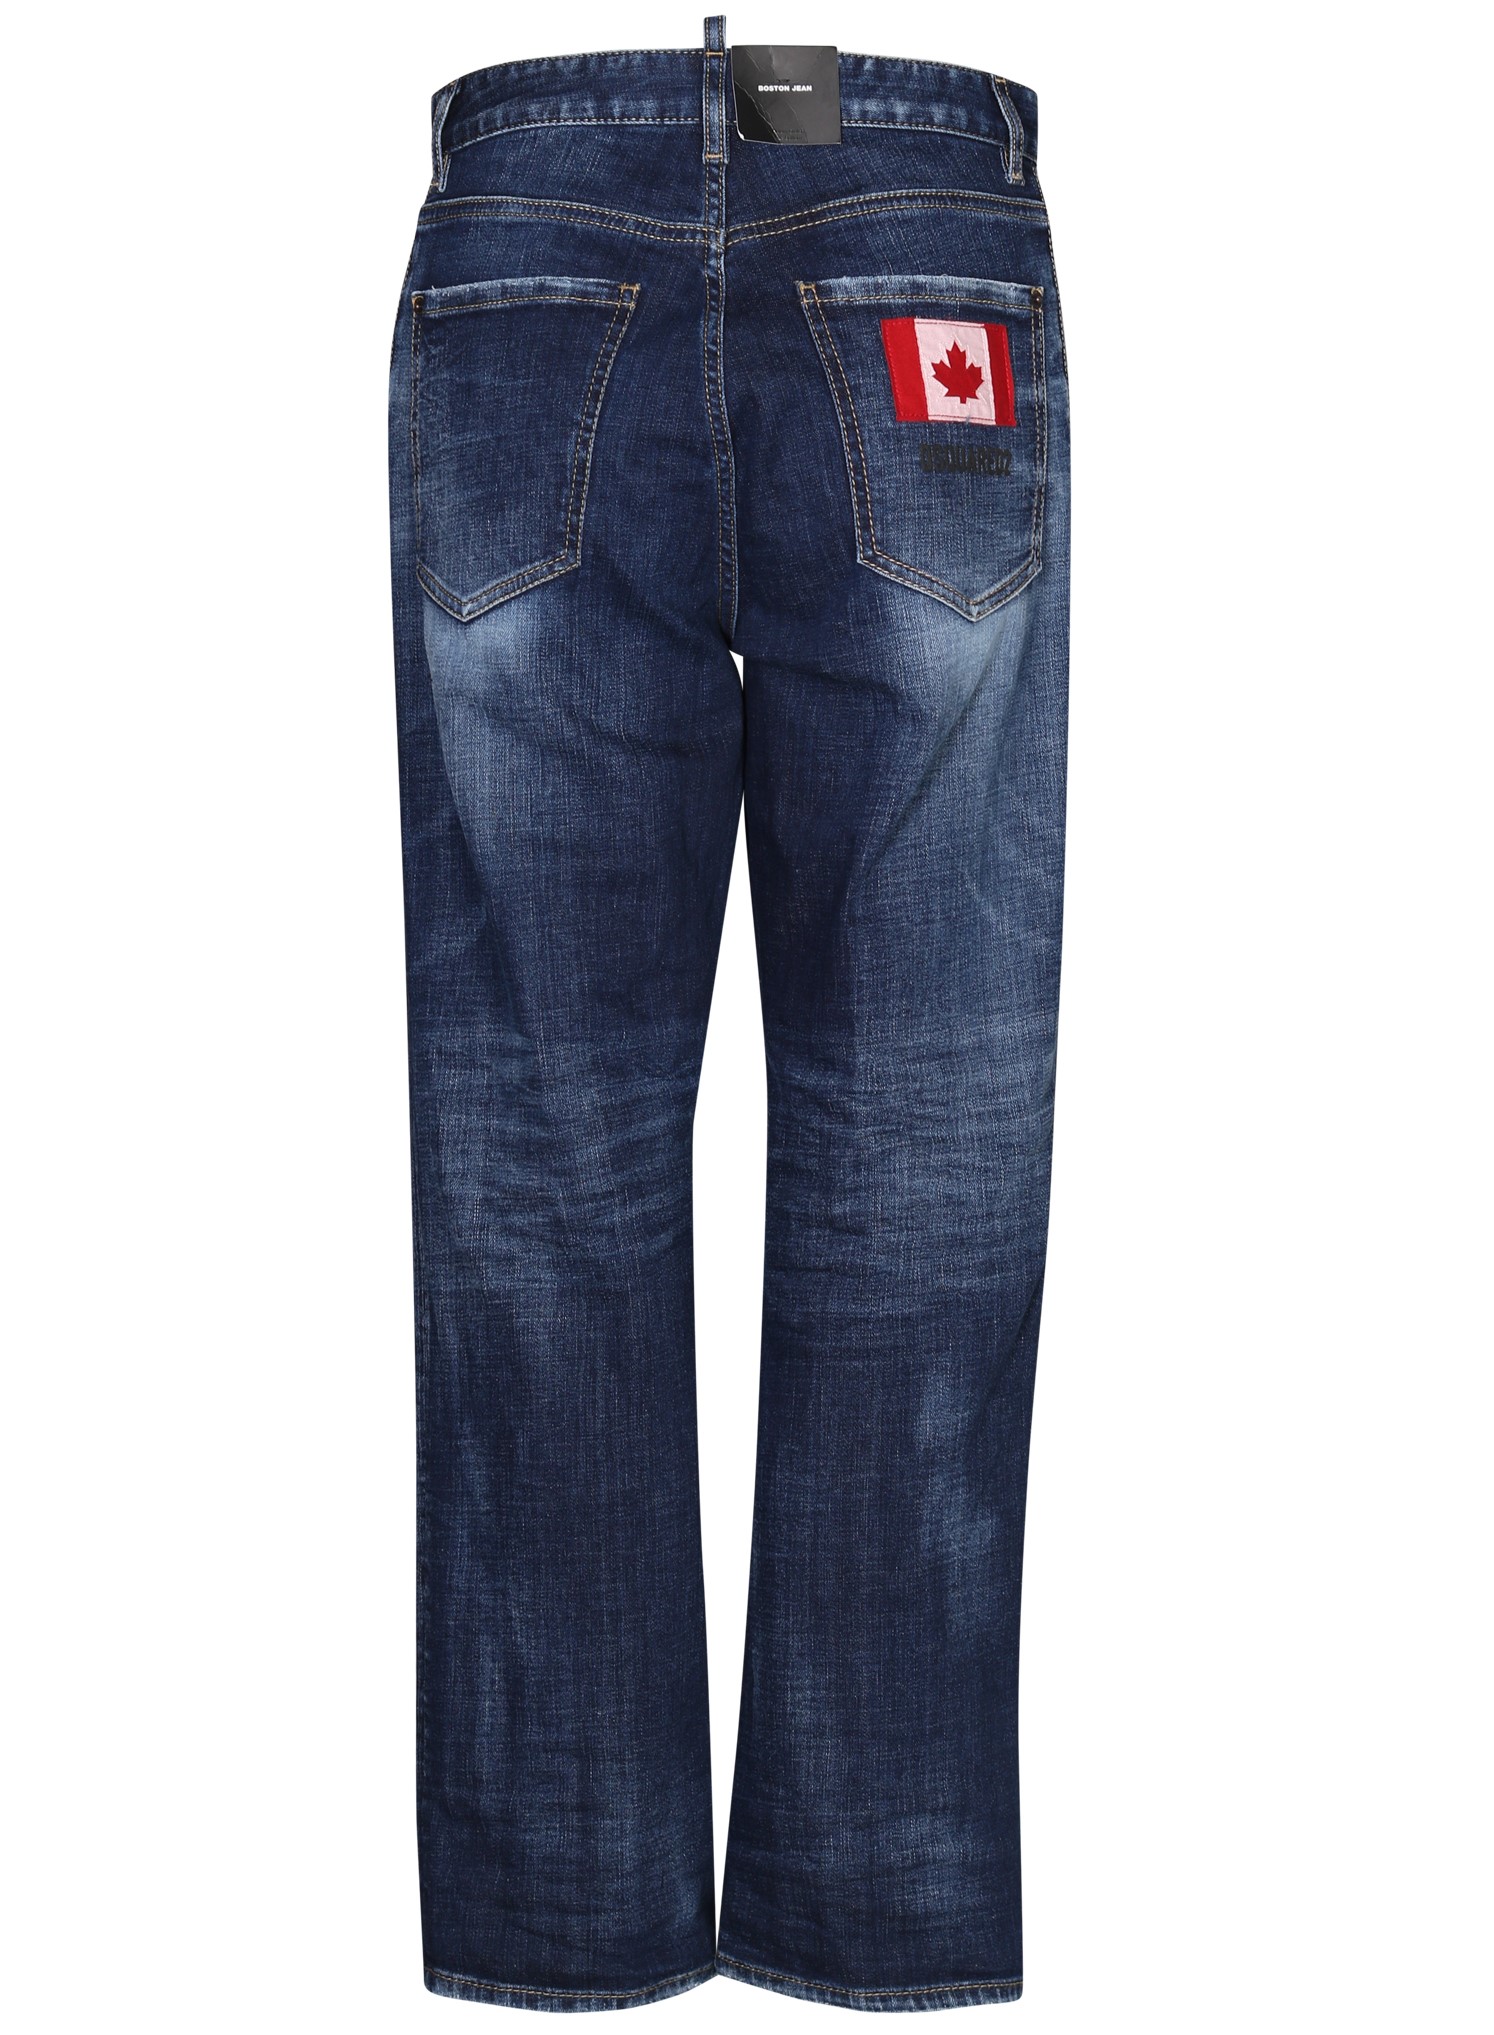 DSQUARED2 Boston Jeans in Washed Dark Blue